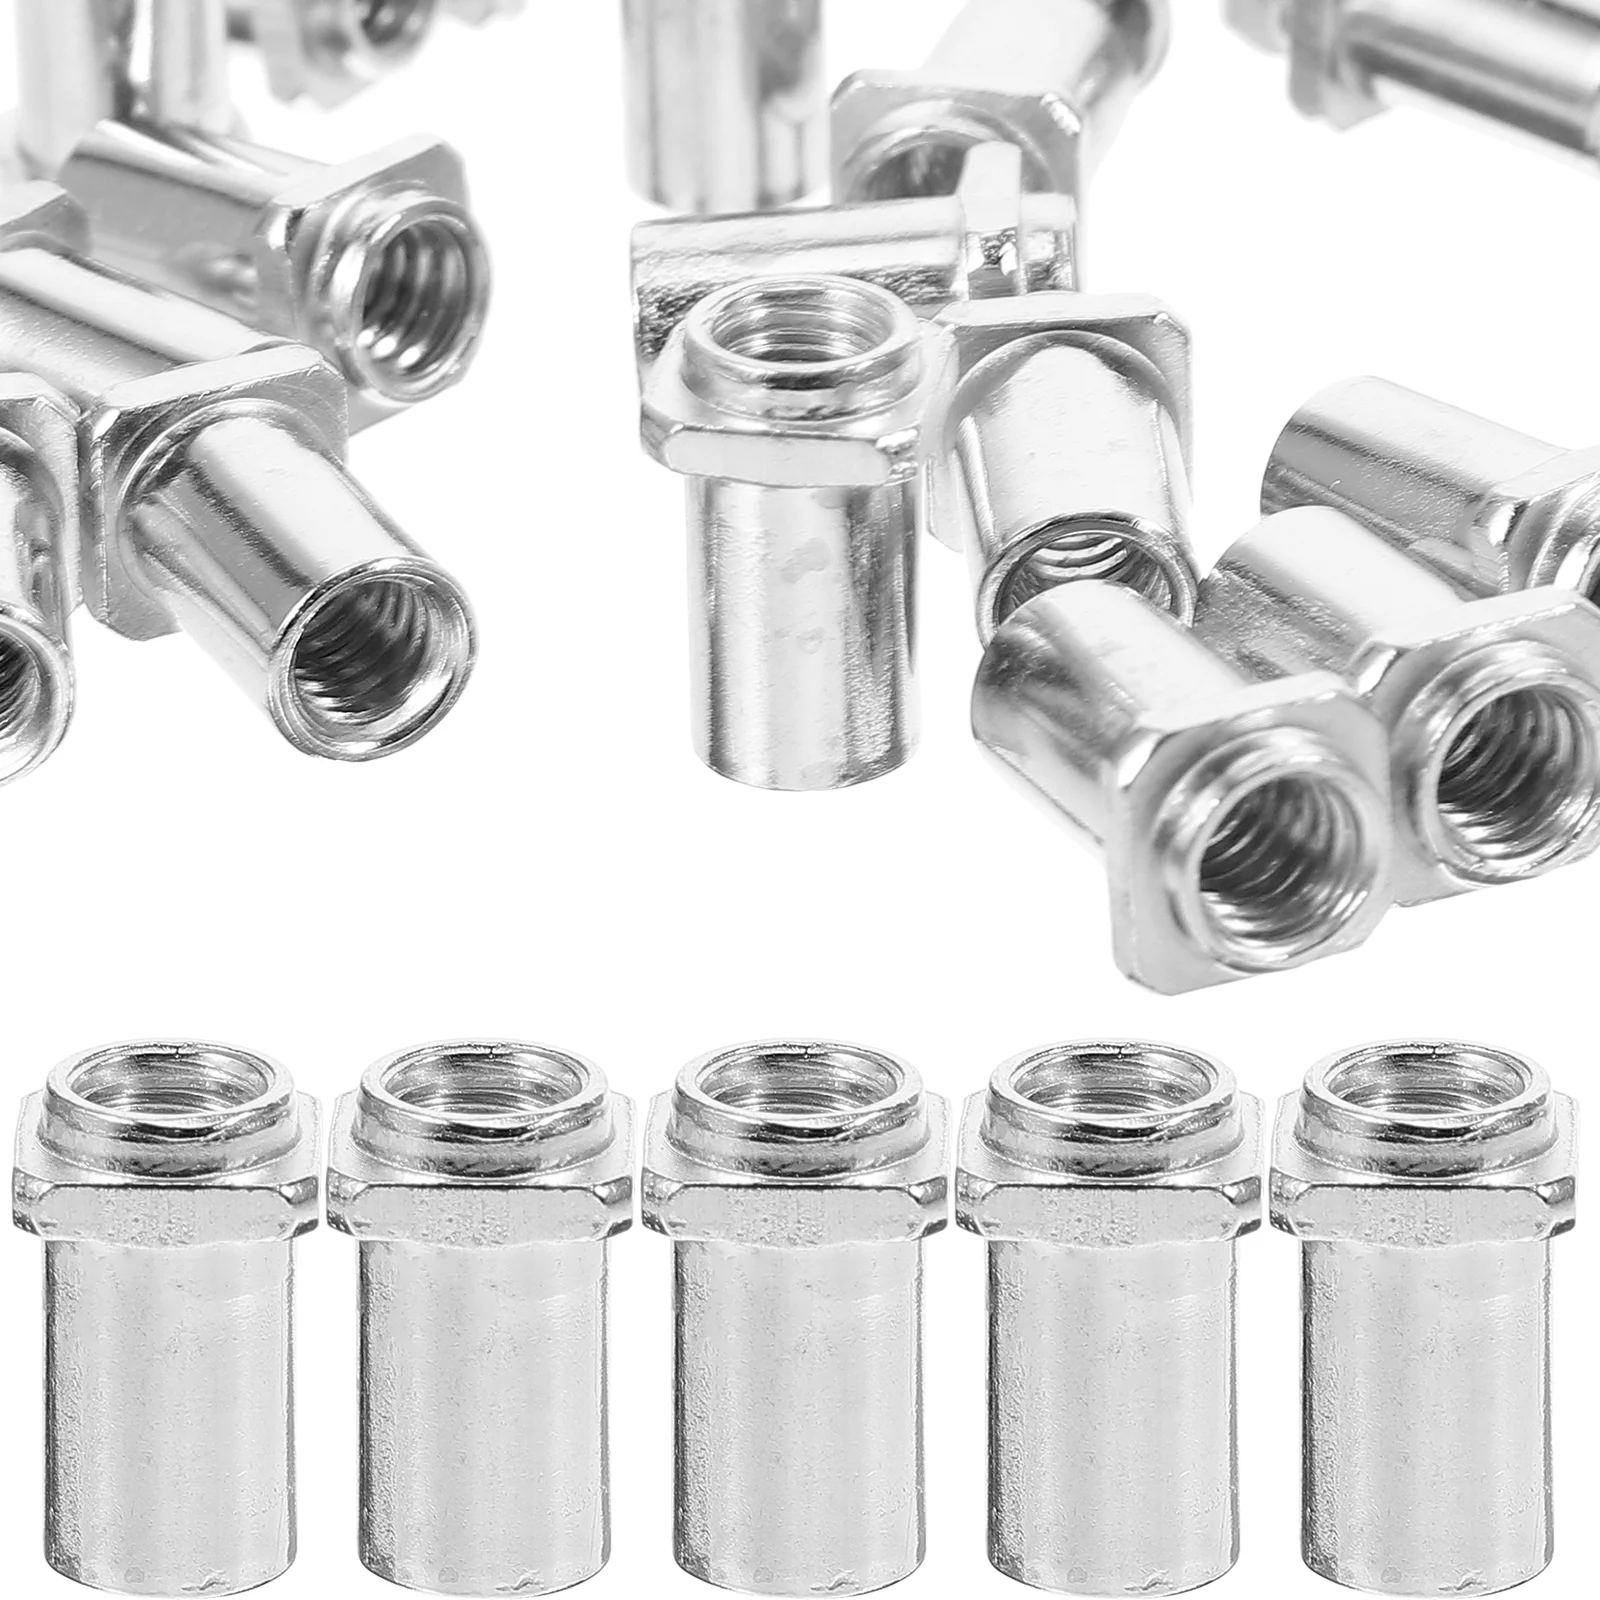 

20 Pcs Swivel Nuts Tom Lug Drum Part Accessory Electric Guitar Tuner Tuning Floor Iron Roller